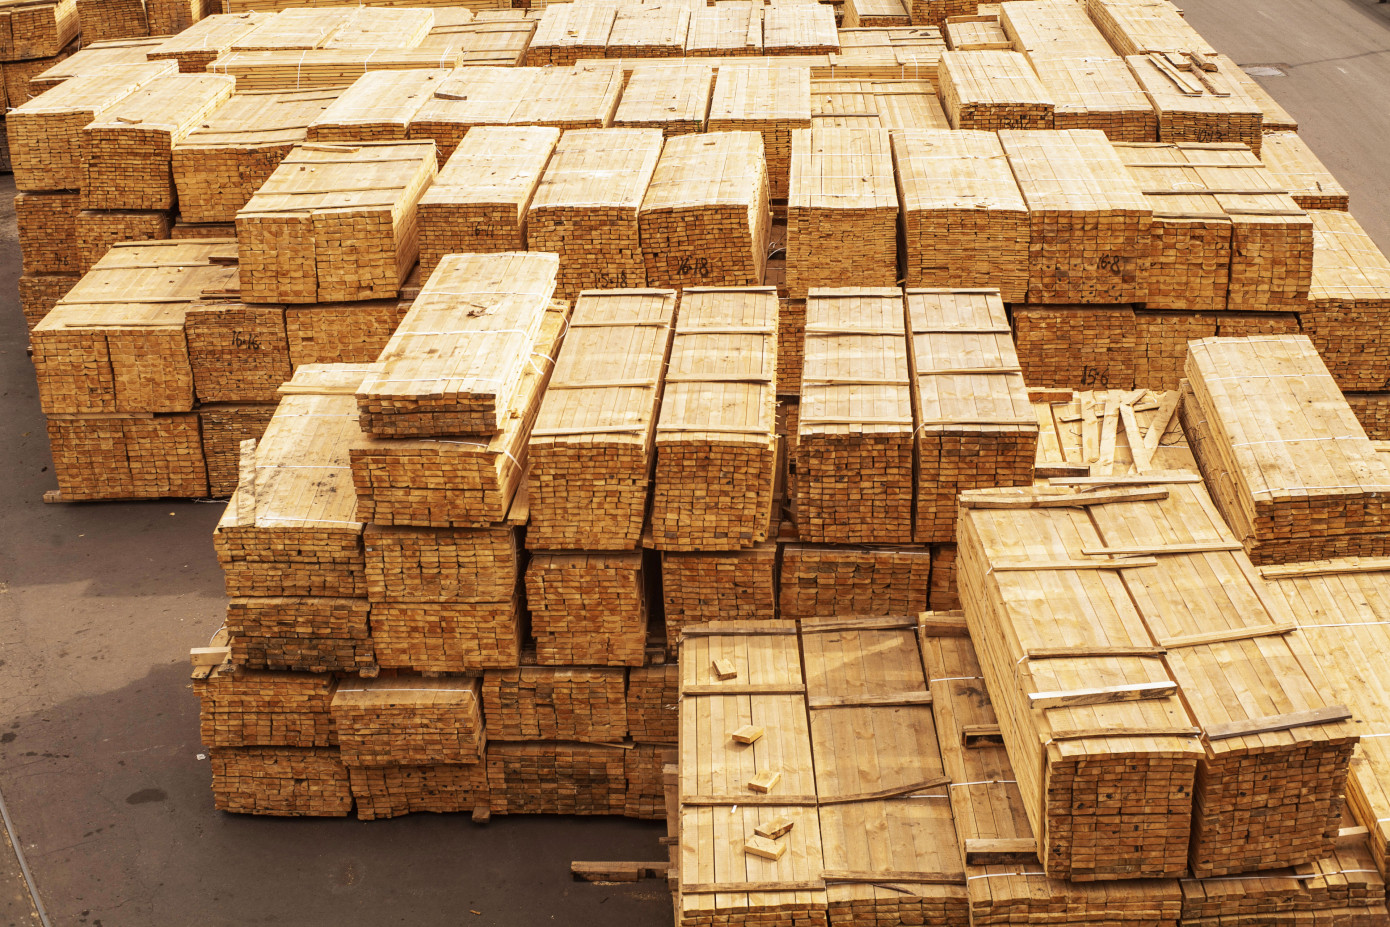 In March, price for lumber exported from Lithuania expands 7%